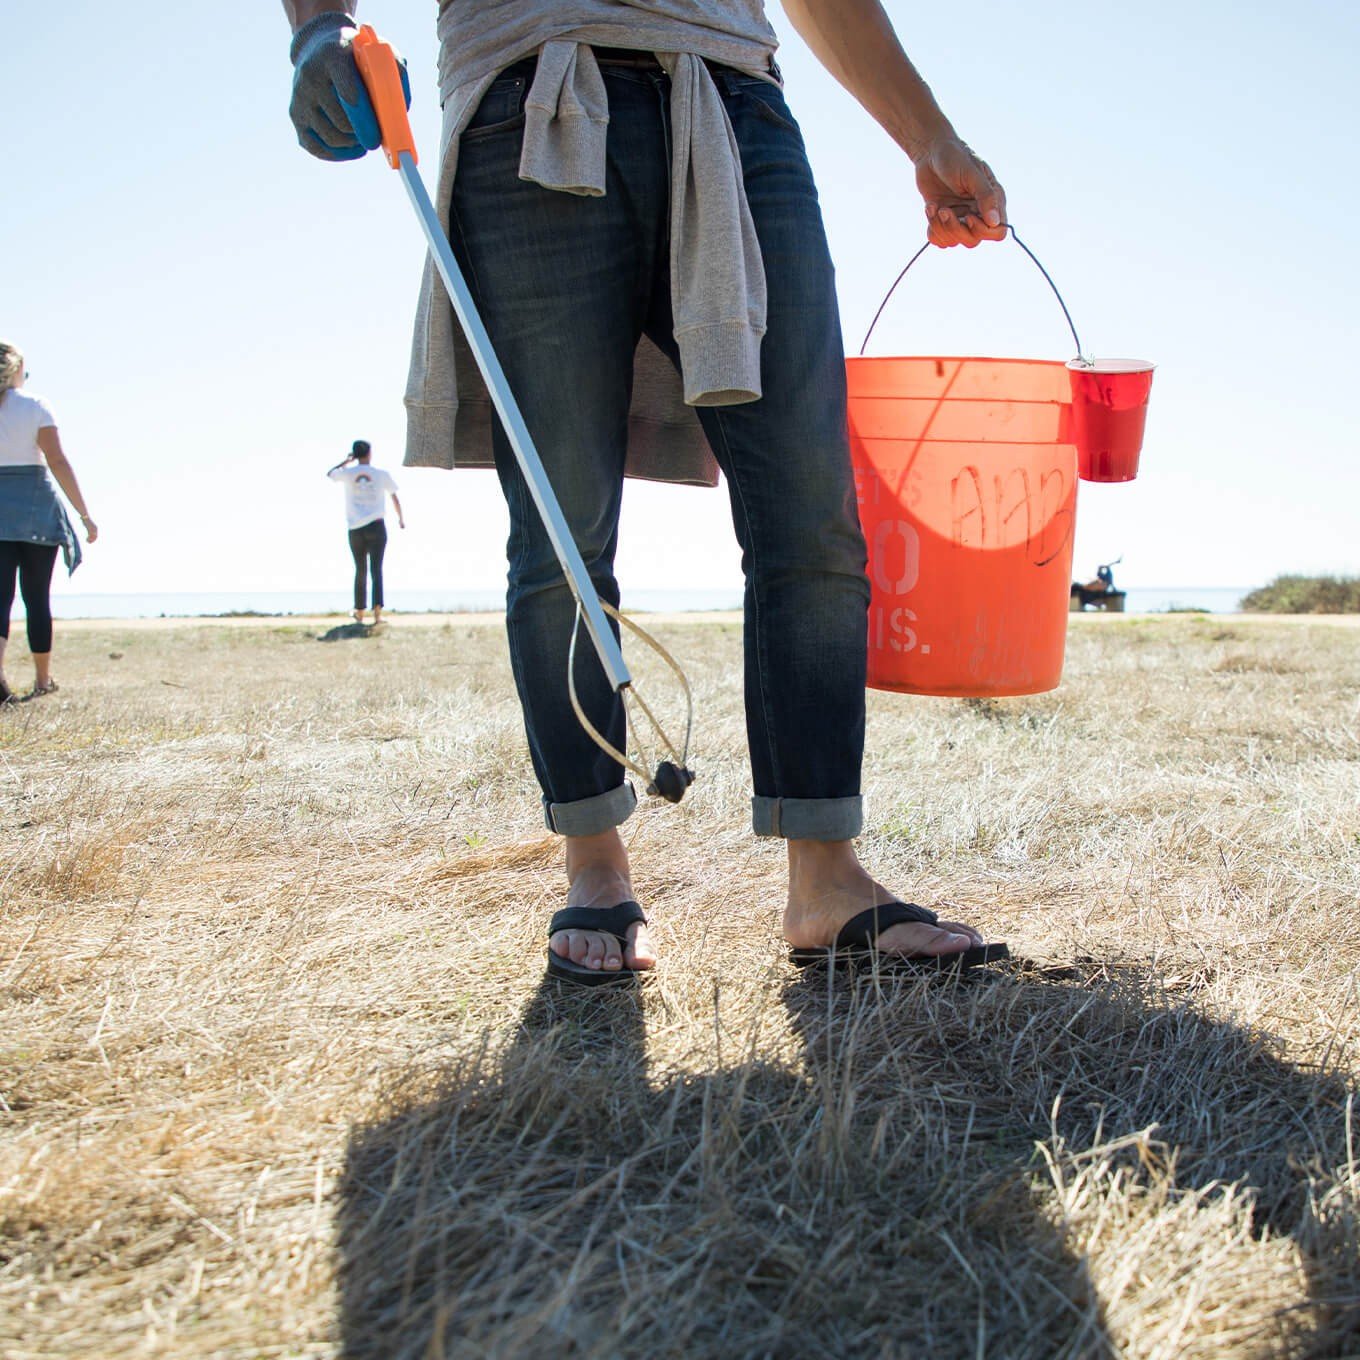 Volunteer using a grabber tool and a bucket during a beach cleanup event